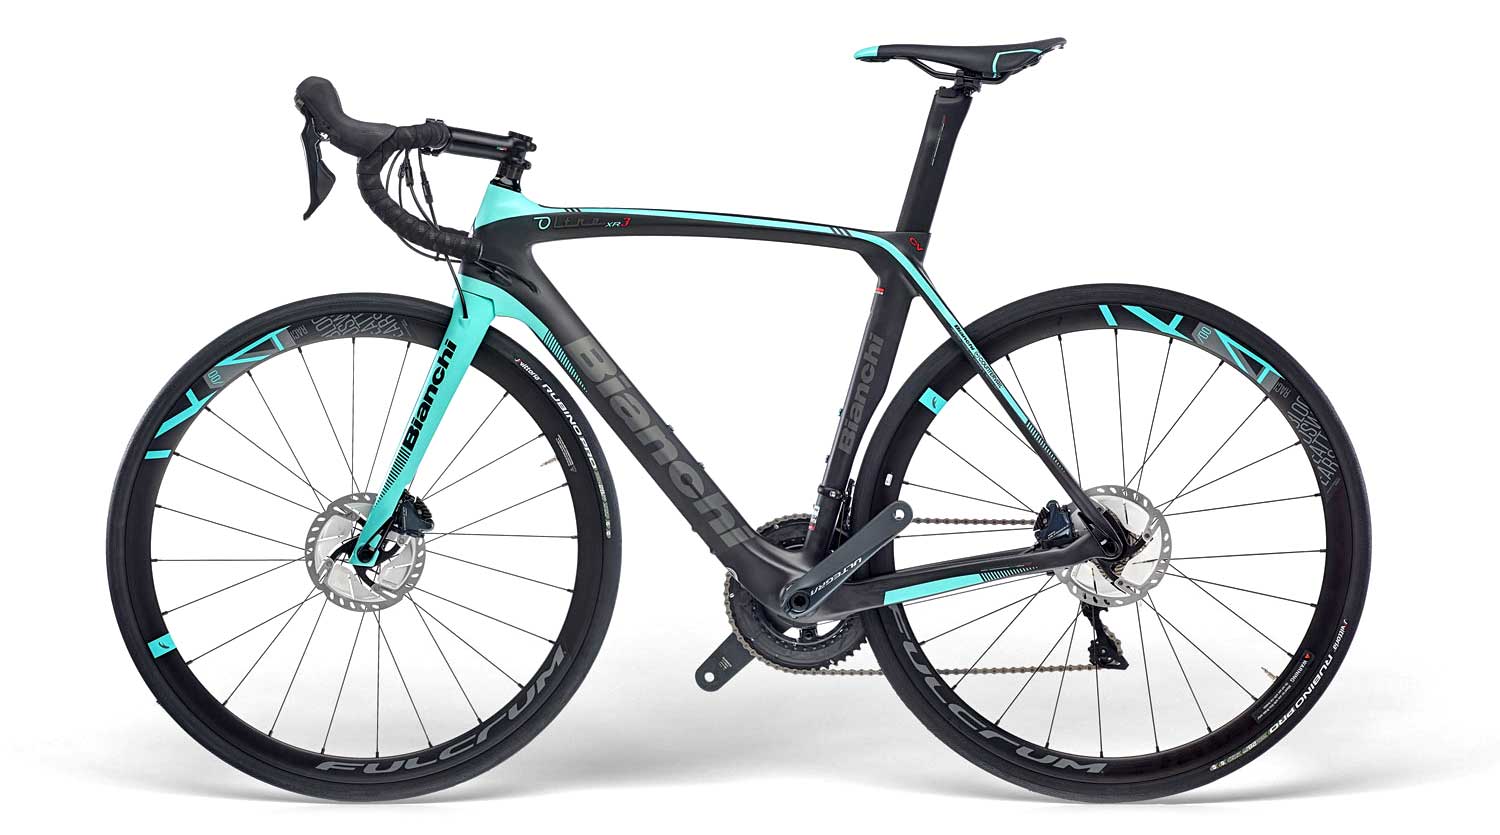 New Bianchi Oltre XR3 Disc is their first disc brake Countervail 